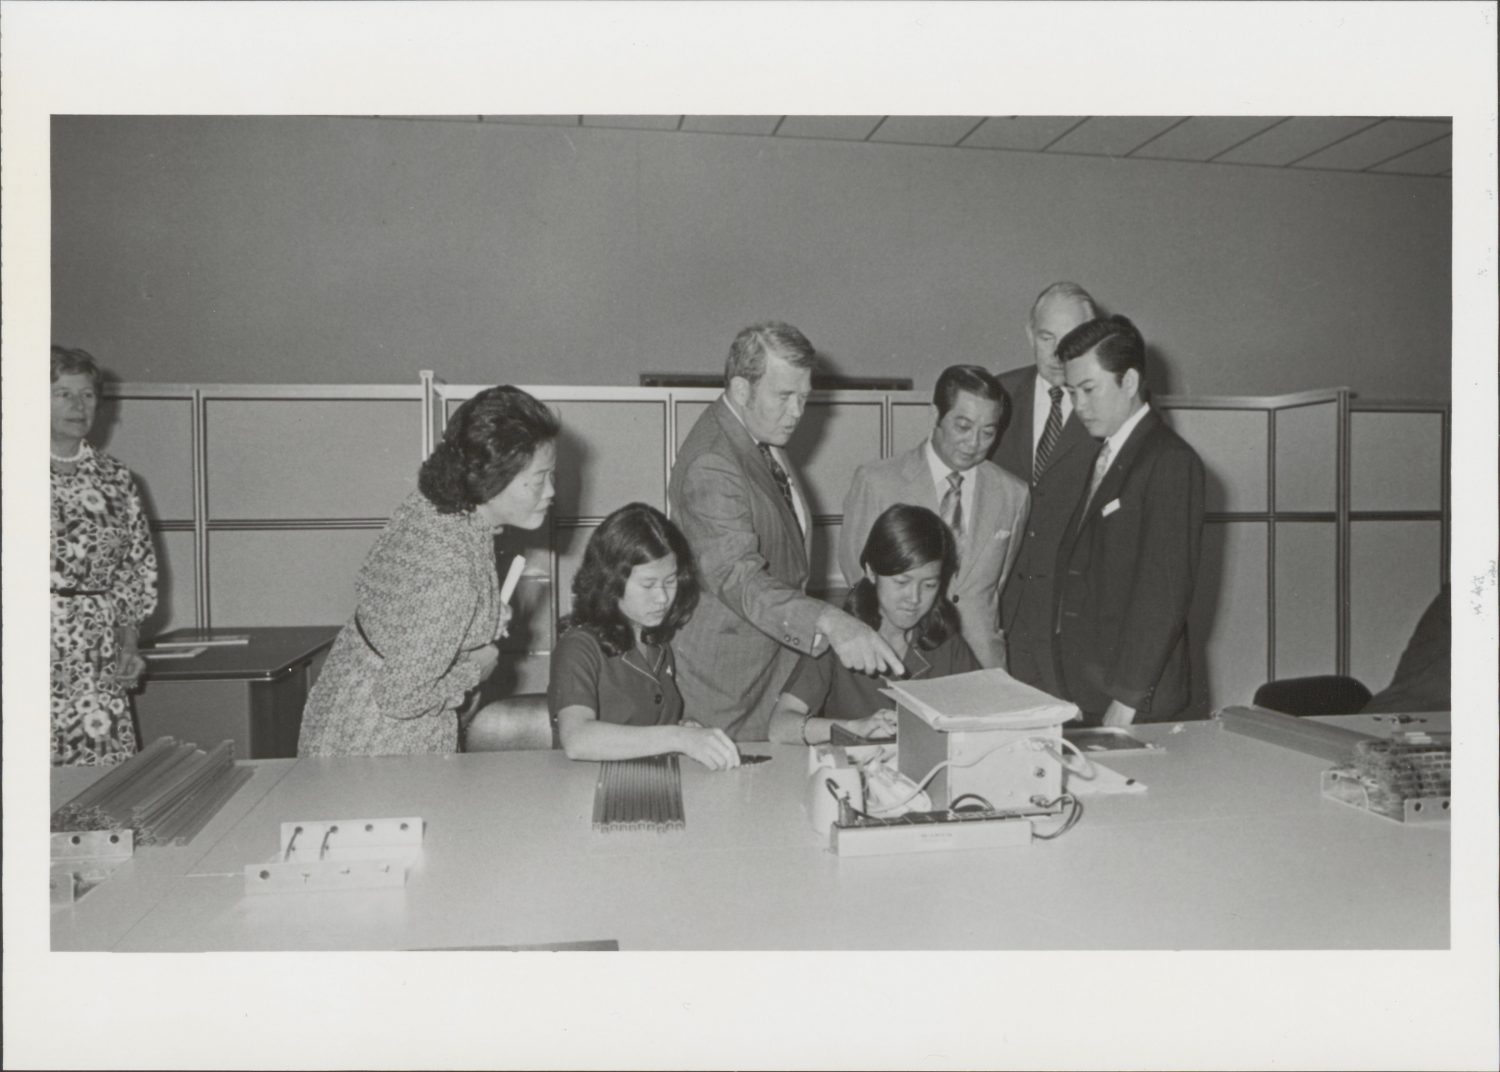 Hewlett and Packard speaking with employees in the 1970s.